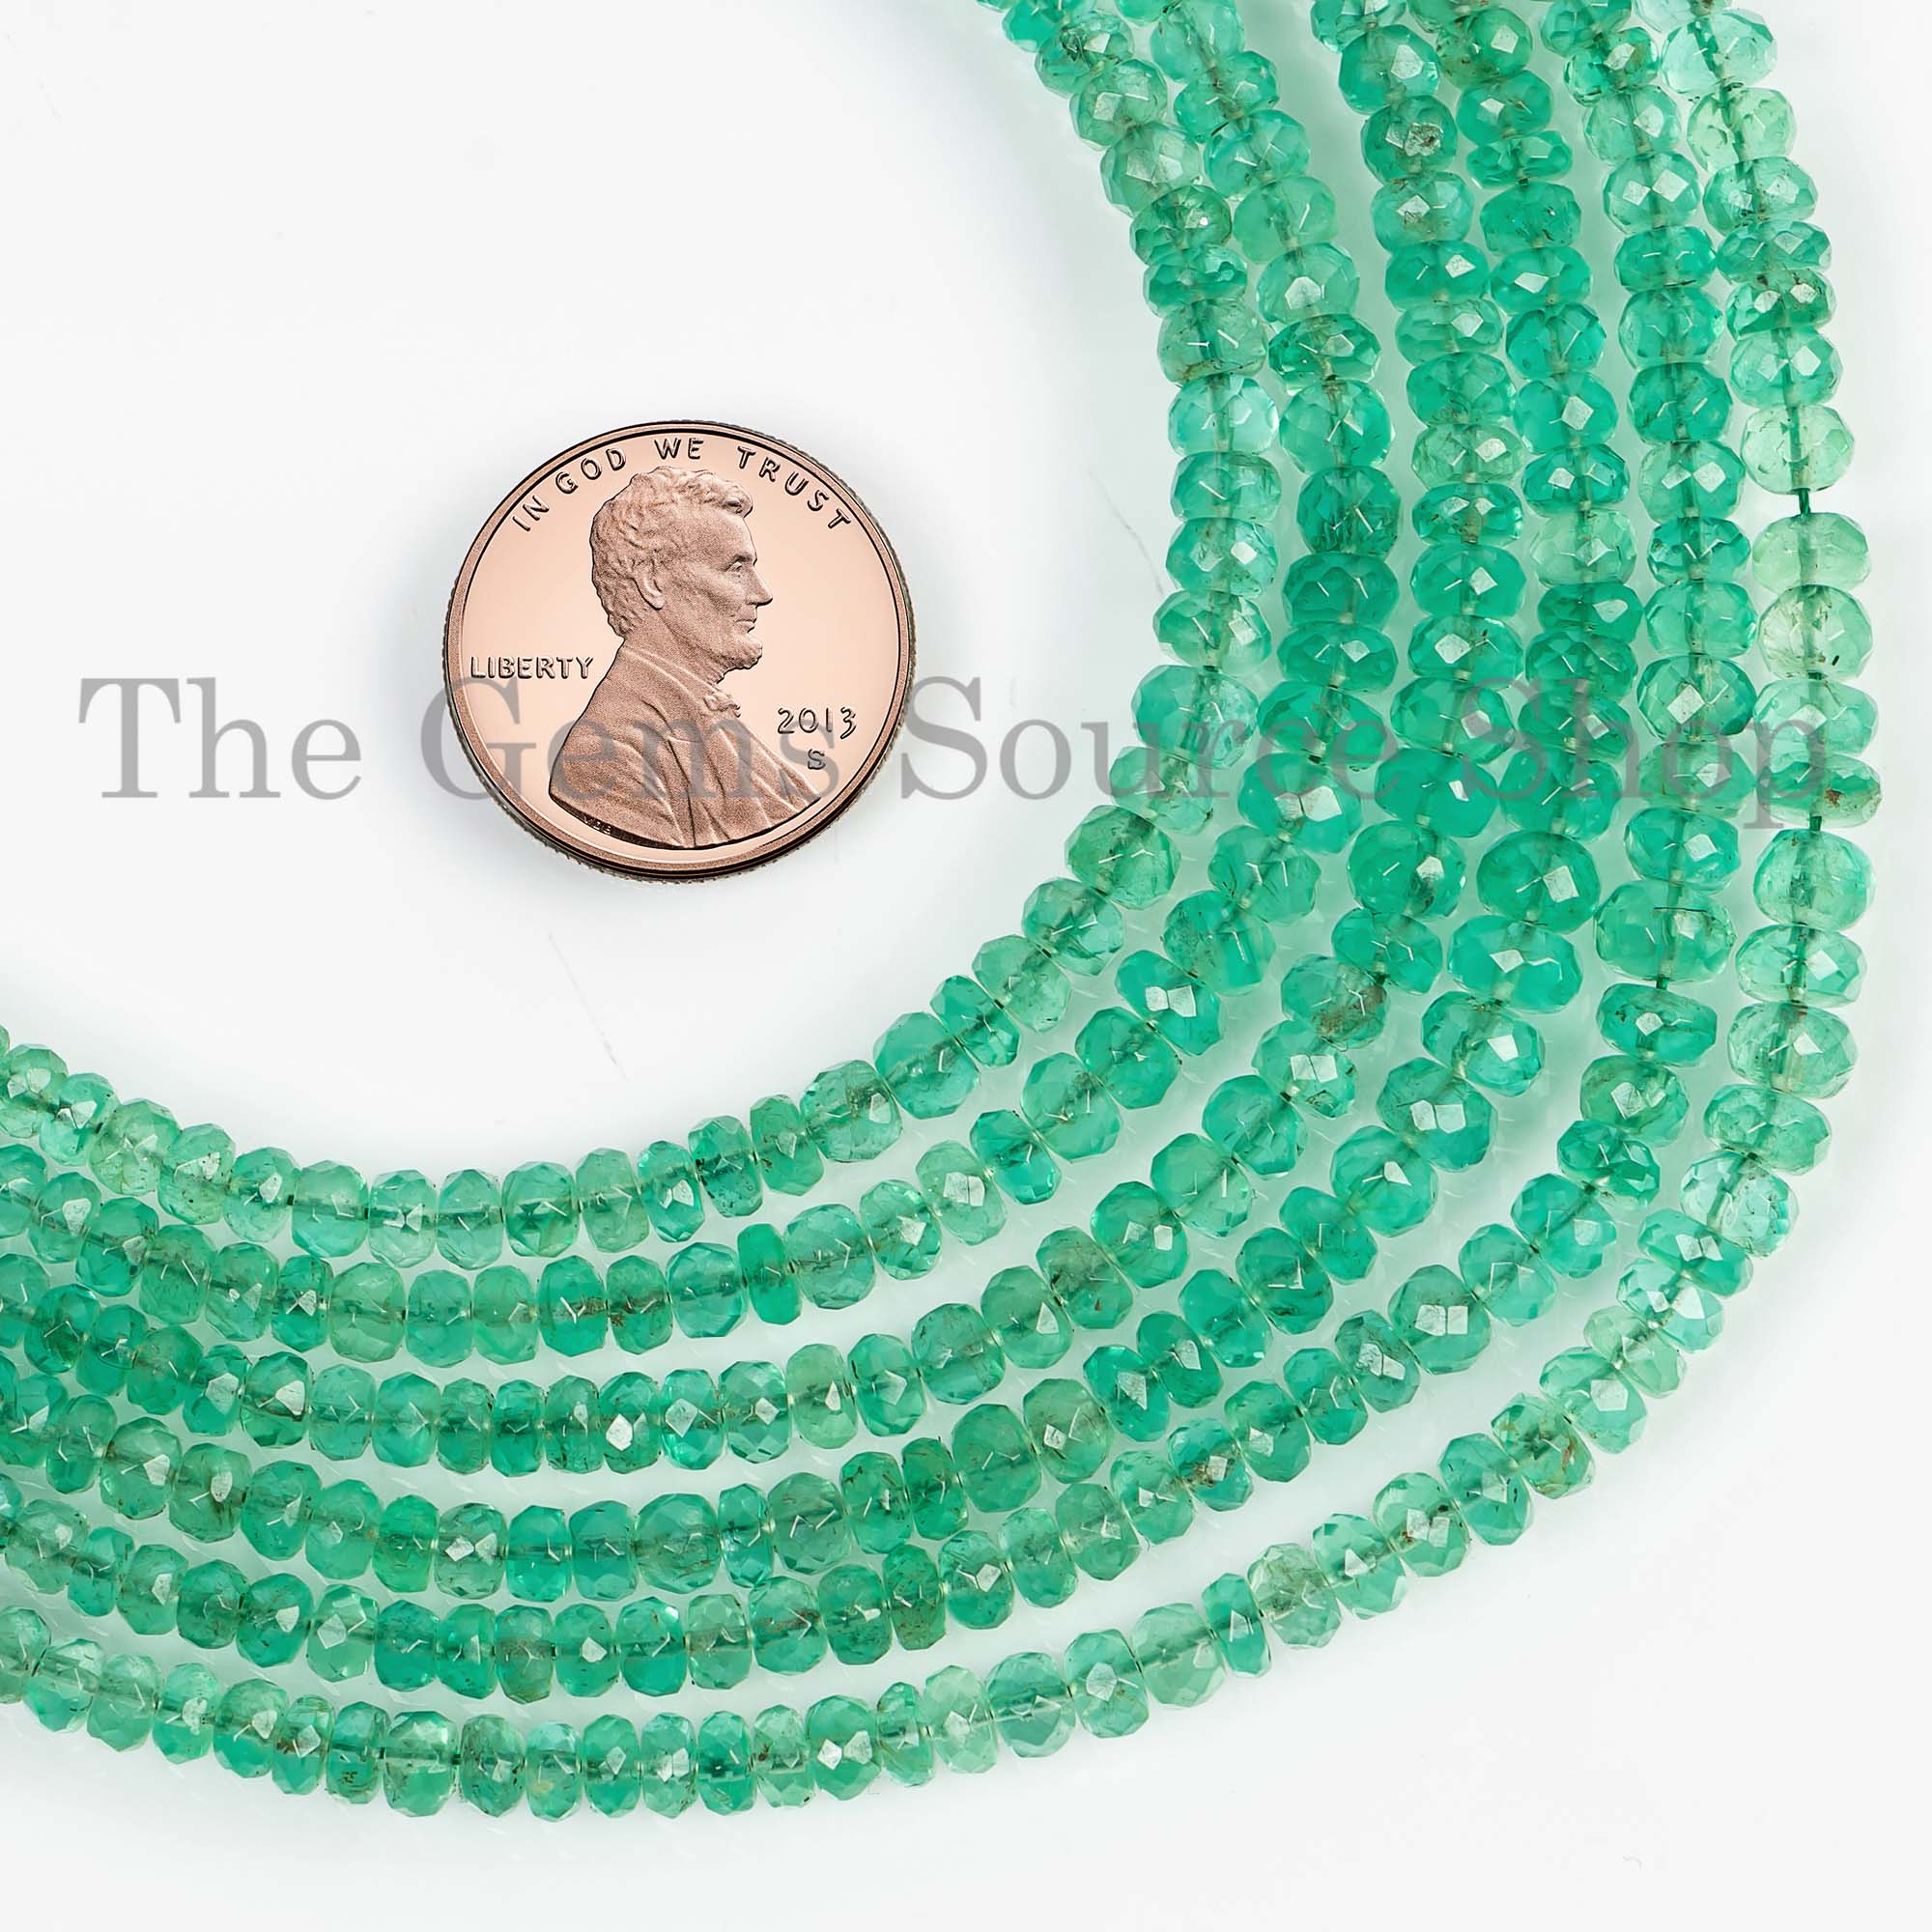 2-5mm Natural Emerald Faceted Rondelle, Wholesale Loose Gemstone Beads, TGS-4492